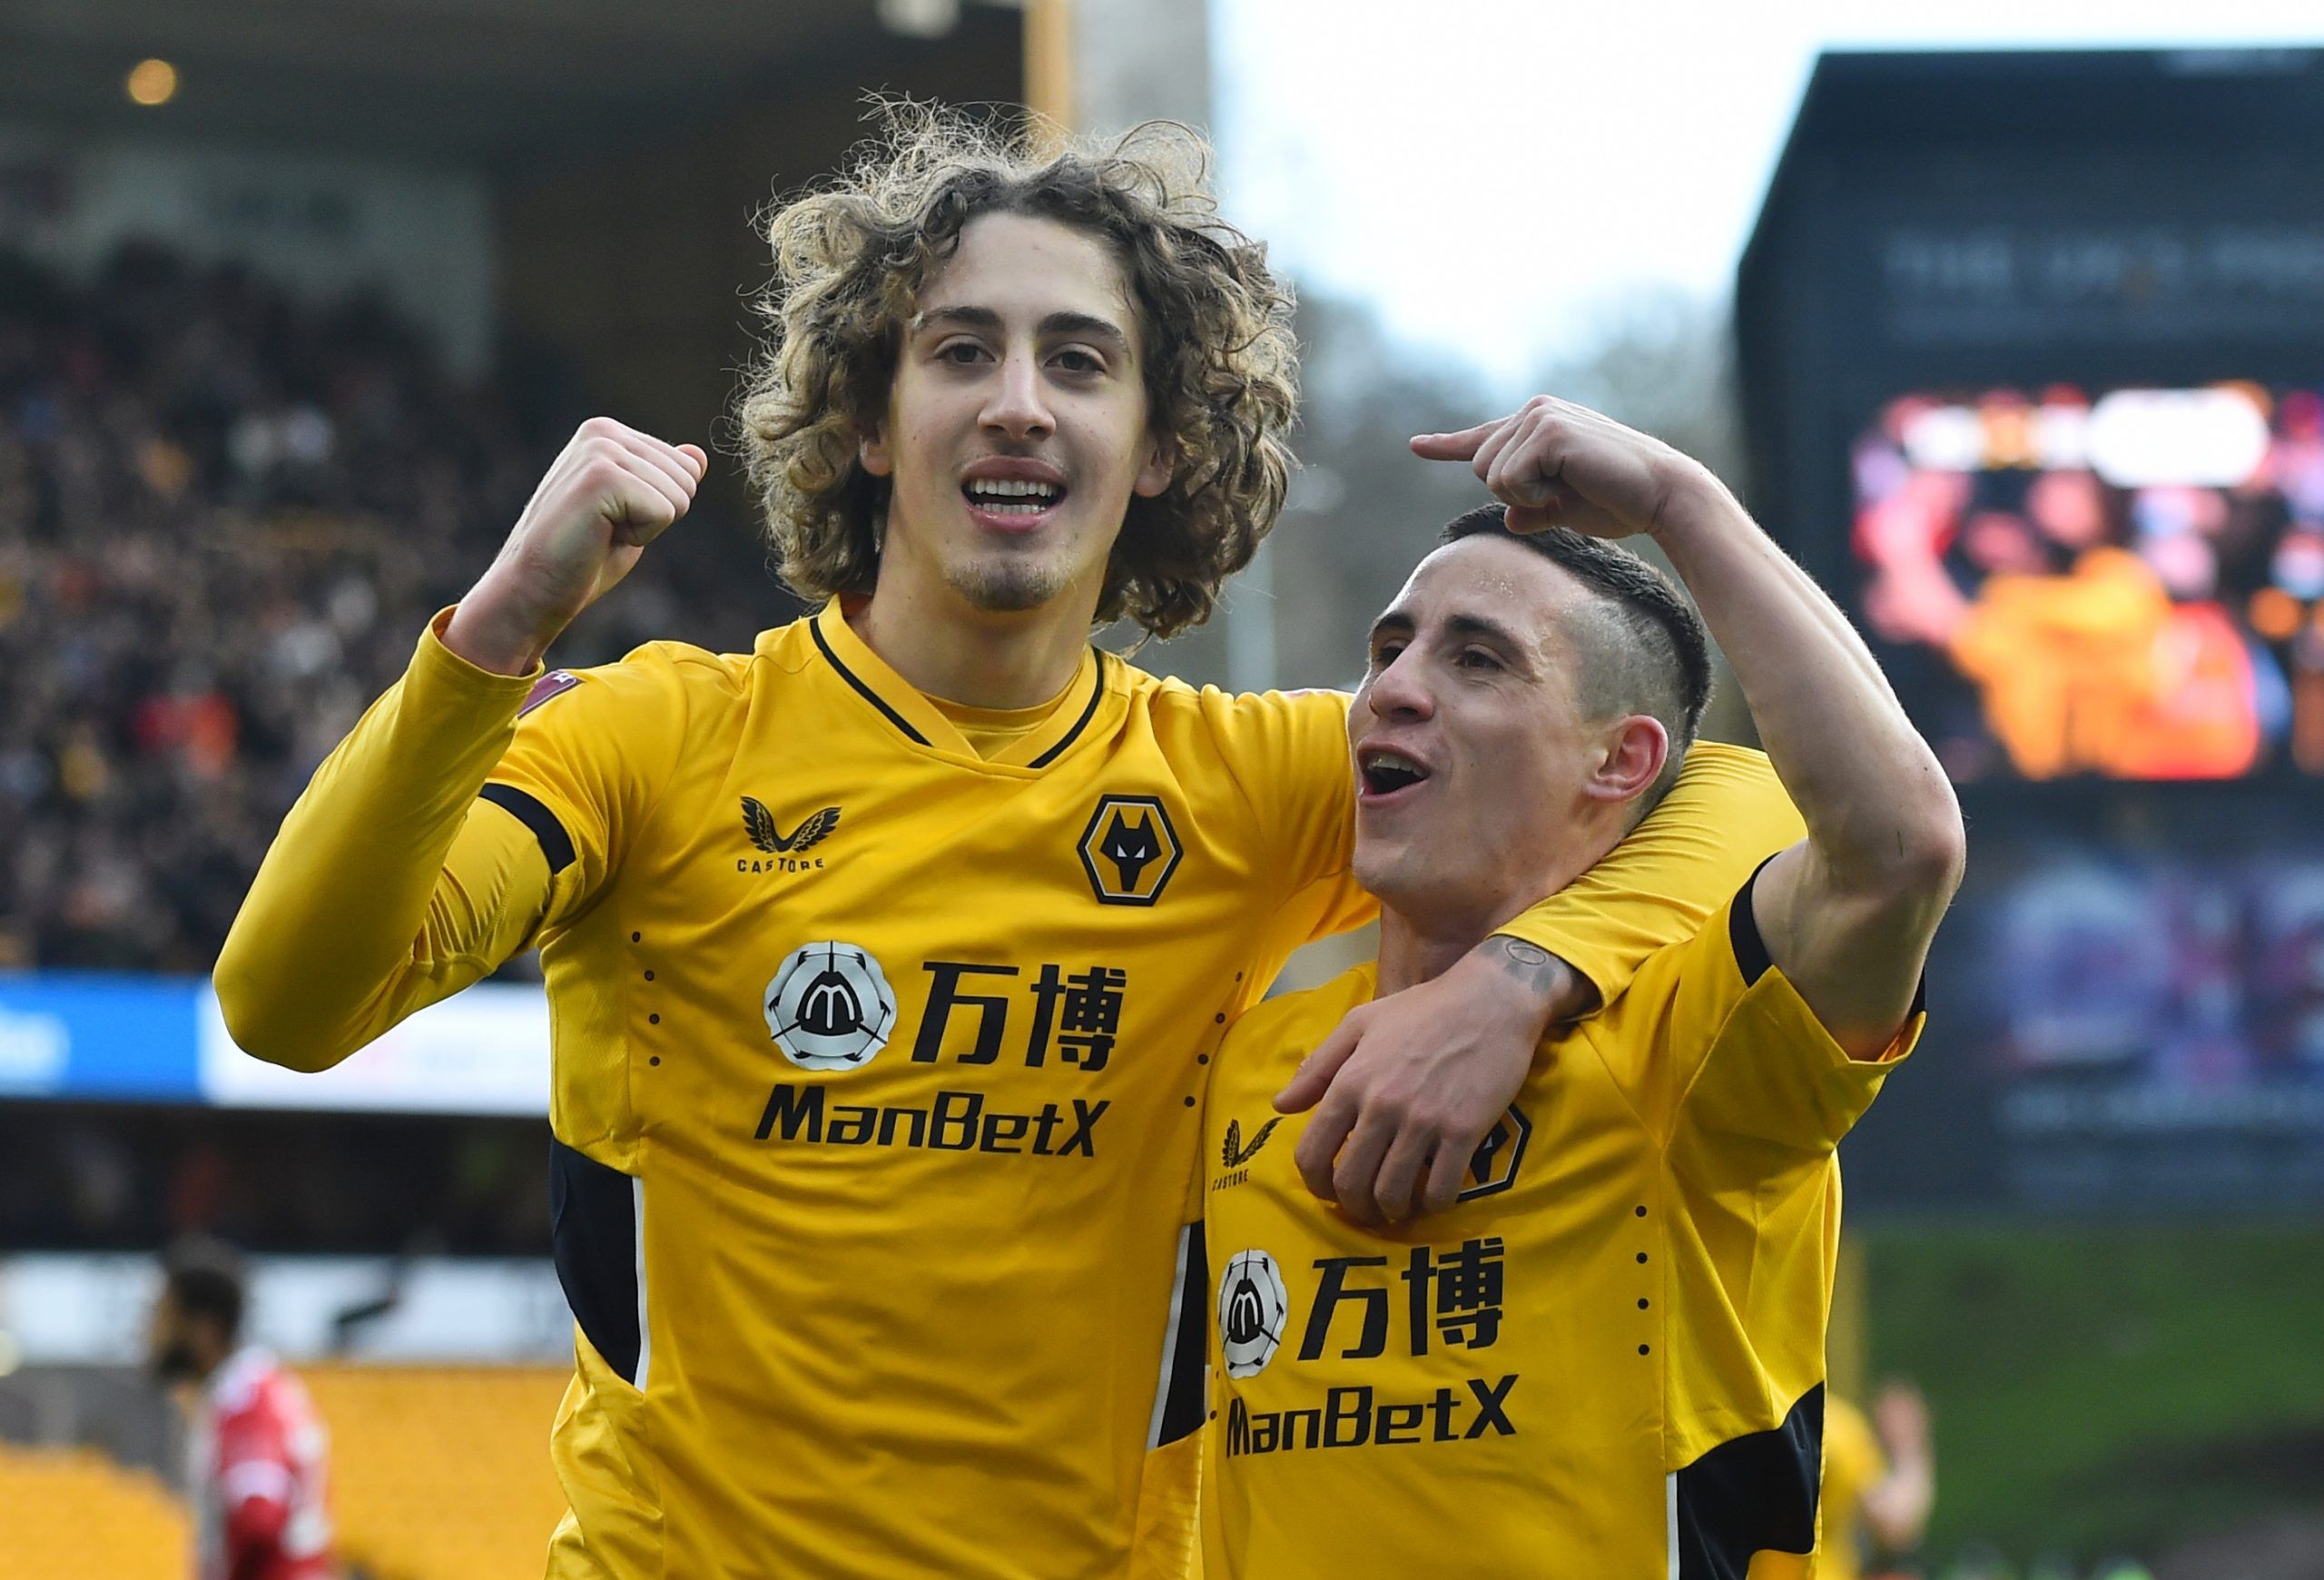 Soccer Football - FA Cup Third Round - Wolverhampton Wanderers v Sheffield United - Molineux Stadium, Wolverhampton, Britain - January 9, 2022 Wolverhampton Wanderers' Daniel Podence celebrates scoring their first goal with Fabio Silva REUTERS/Peter Powell